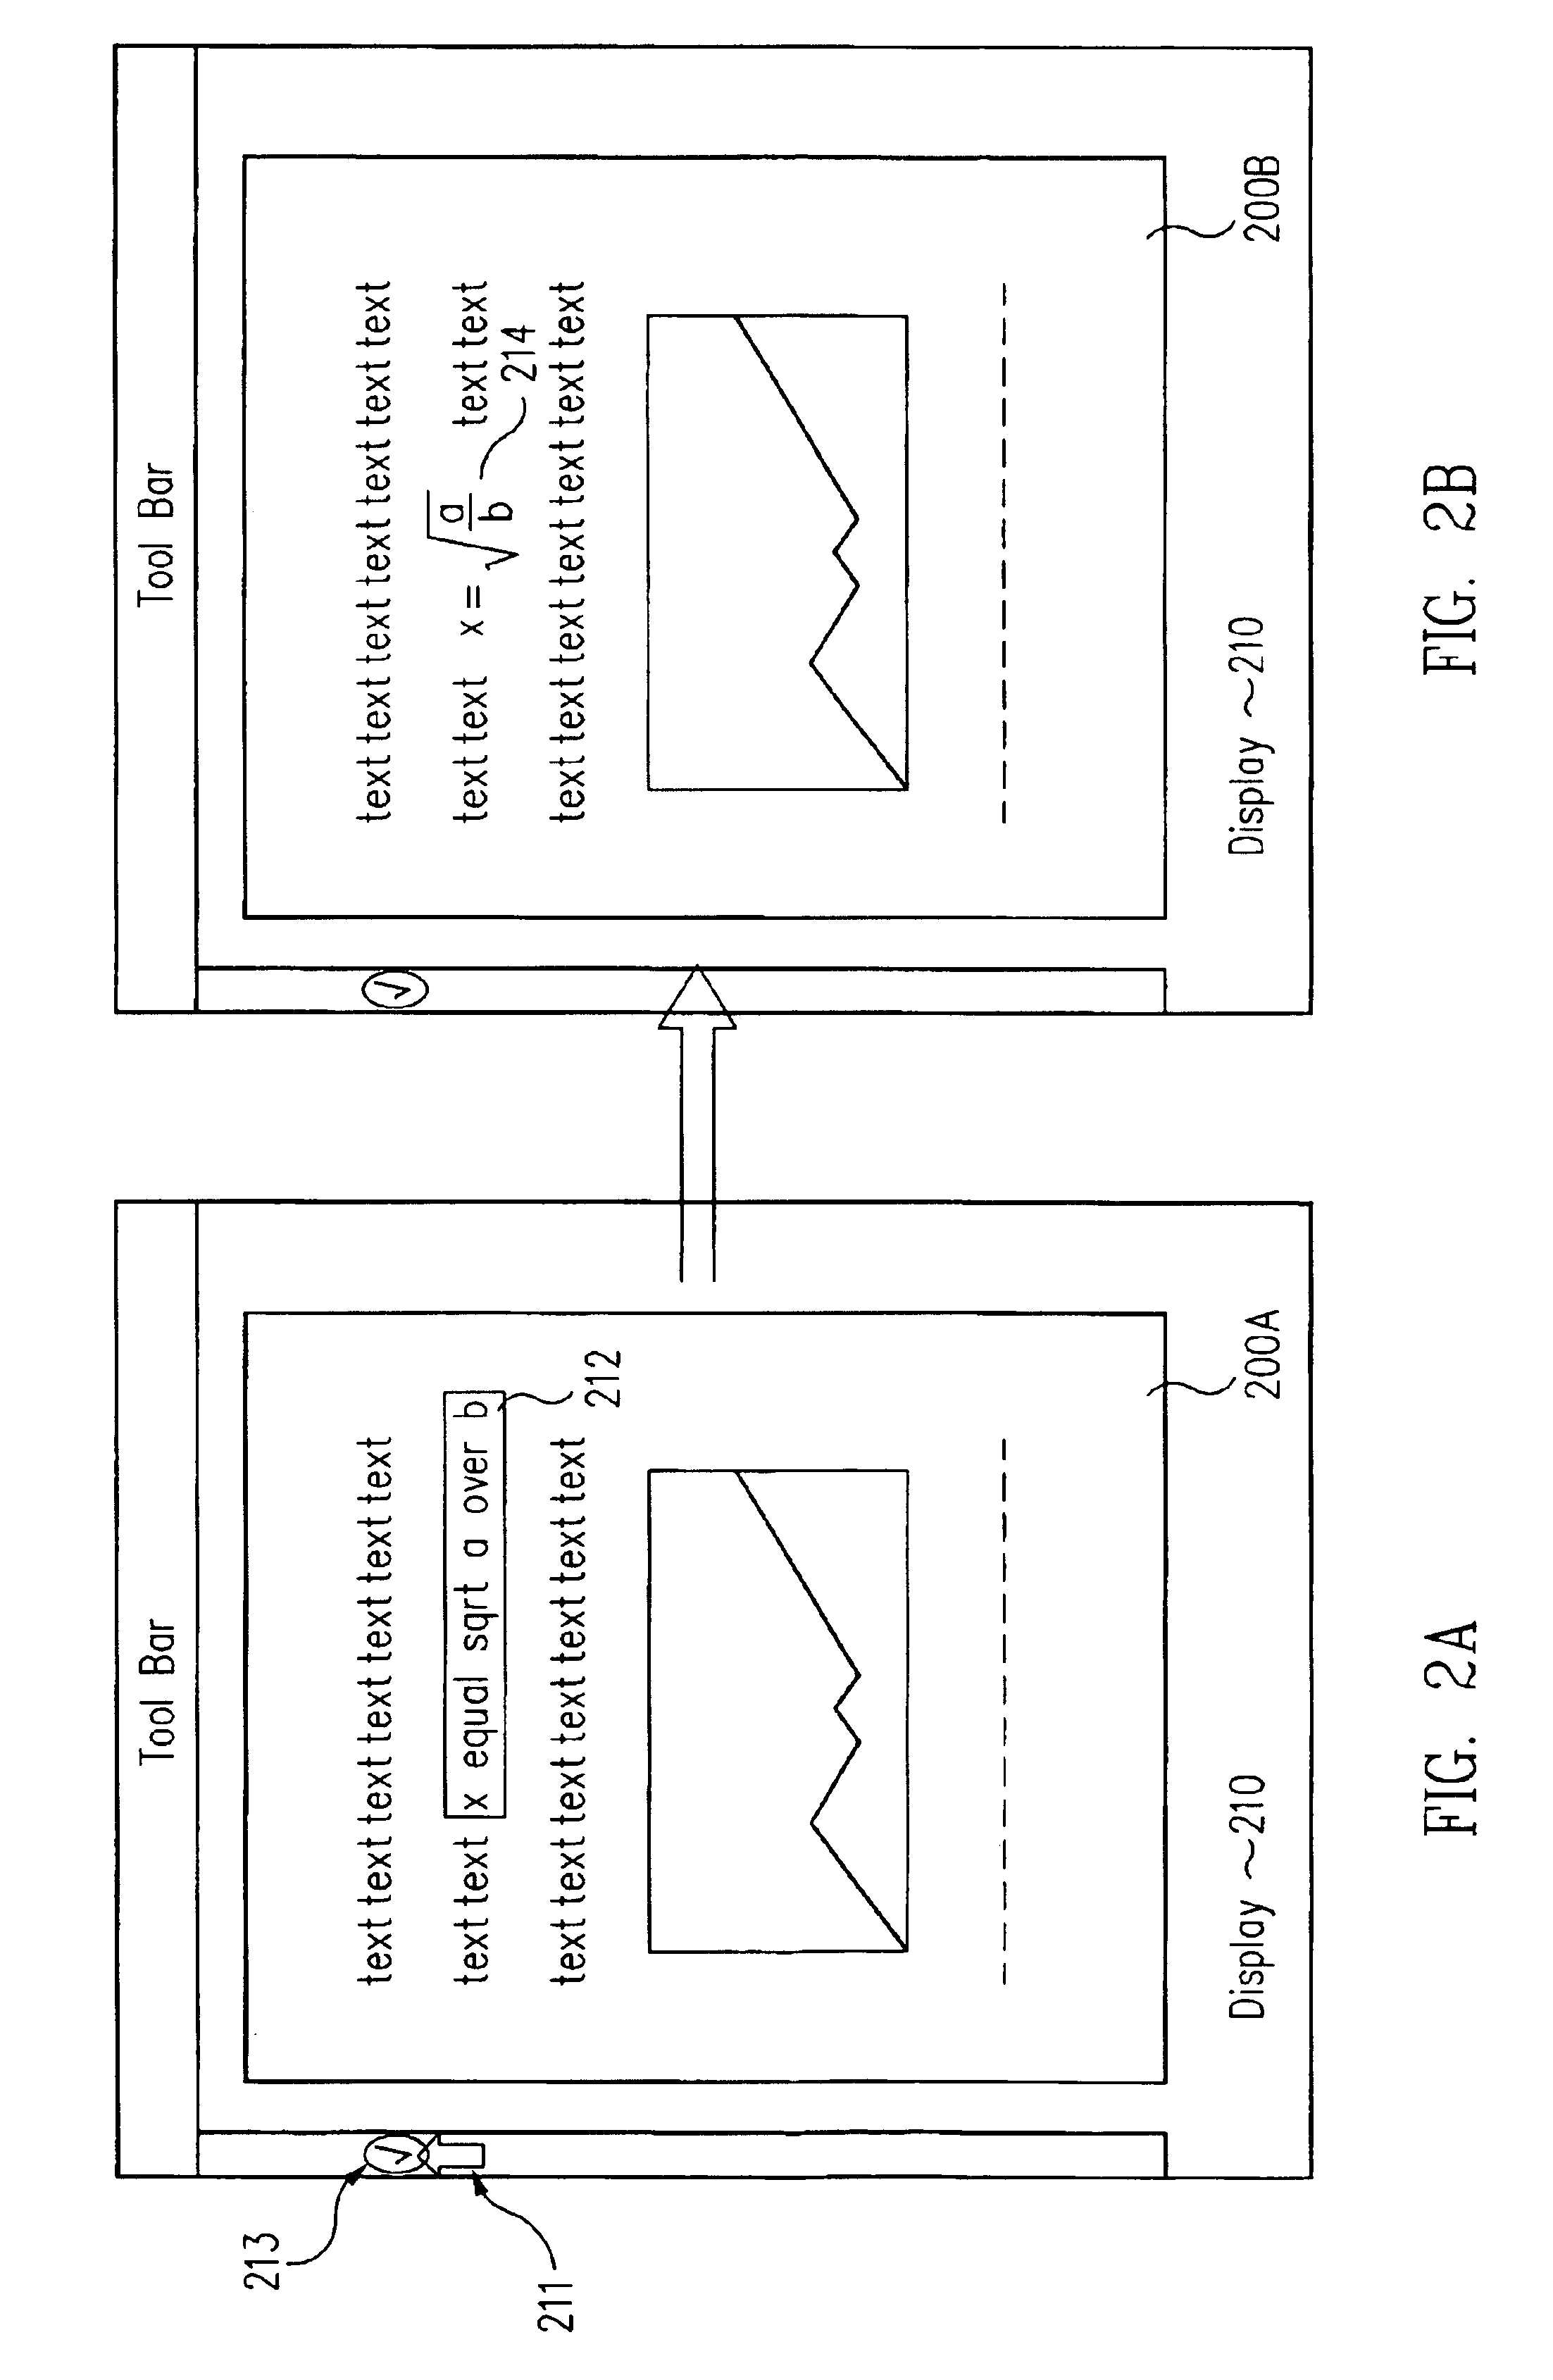 Method and system for inserting a data object into a computer-generated document using a text instruction